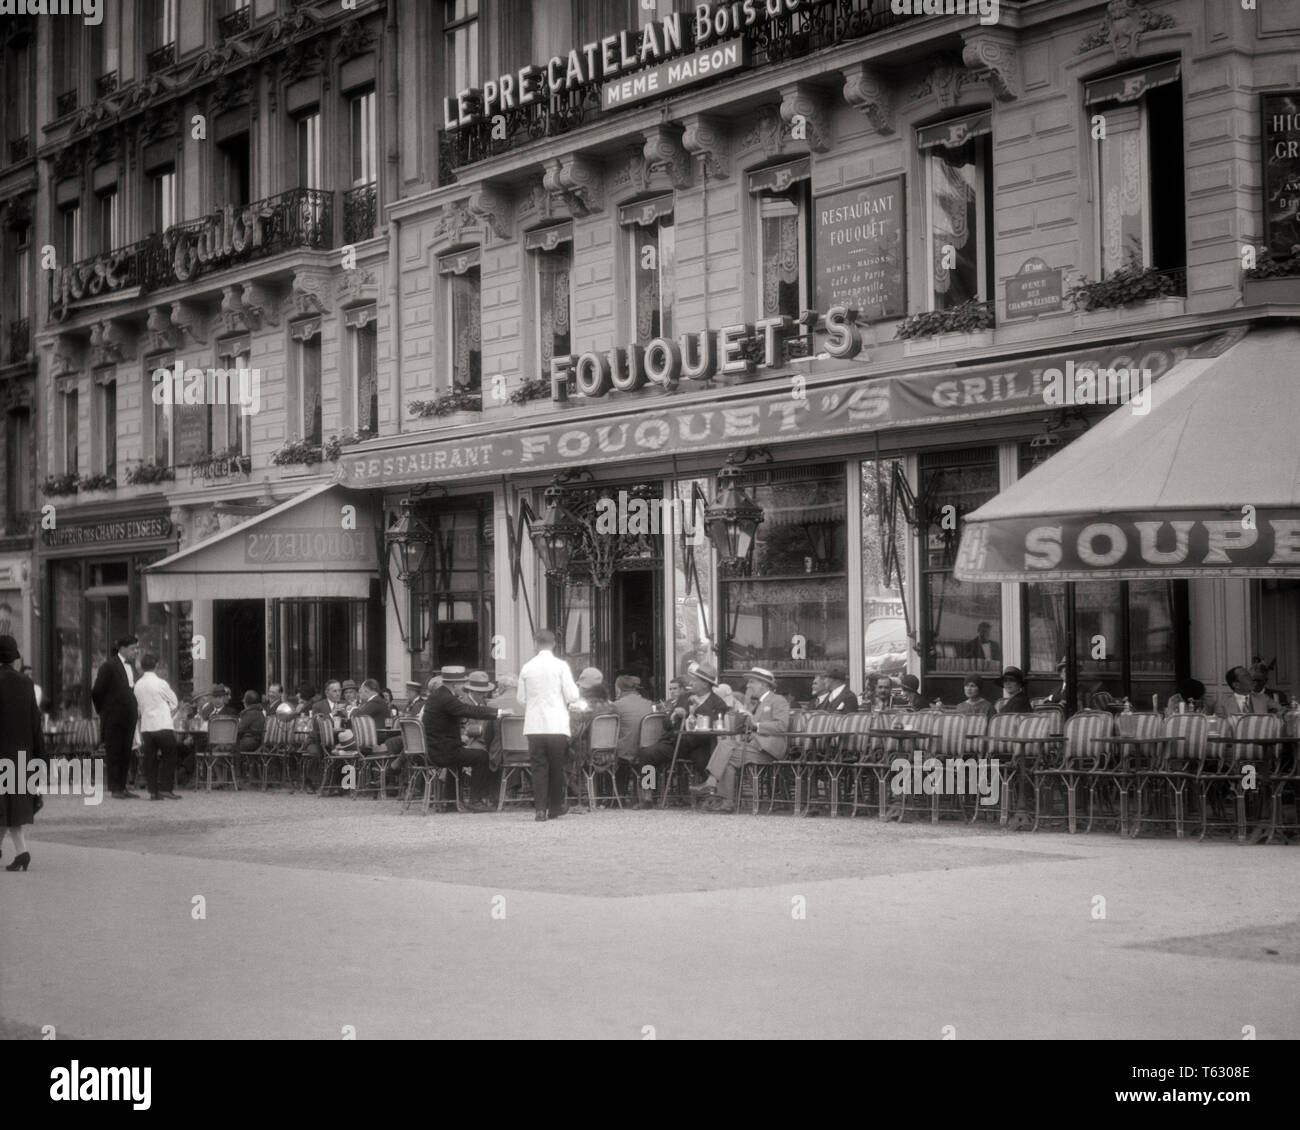 1920s 1930s FOUQUET'S RESTAURANT CAFE CORNER CHAMPS ELYSEES AND GEORGE V PARIS FRANCE  - r3842 HAR001 HARS CUSTOMER SERVICE AND FAMOUS RECREATION TRADITION PRIDE AUTHORITY OCCUPATIONS CONCEPTUAL STYLISH GEORGE V GALA RELAXATION BLACK AND WHITE HAR001 OLD FASHIONED YEARLY Stock Photo